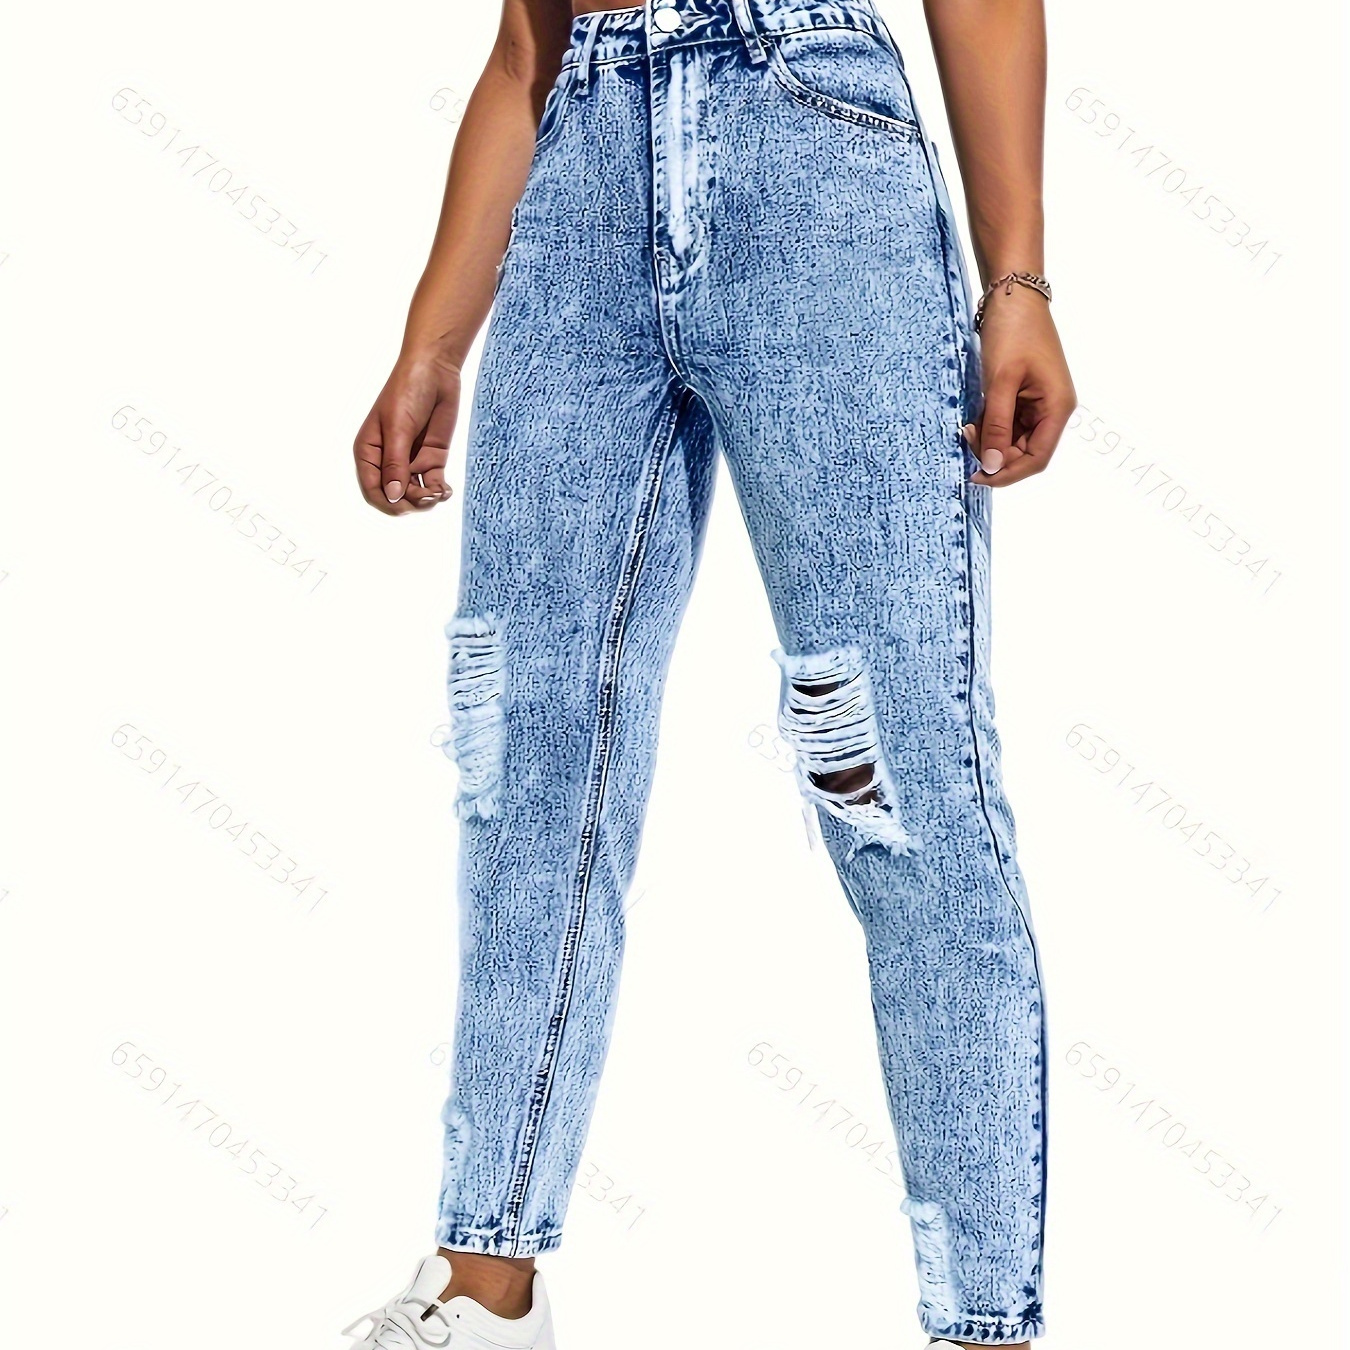 

Blue Ripped Holes Skinny Jeans, Slim Fit Distressed High Stretch Washed Tight Jeans, Women's Denim Jeans & Clothing